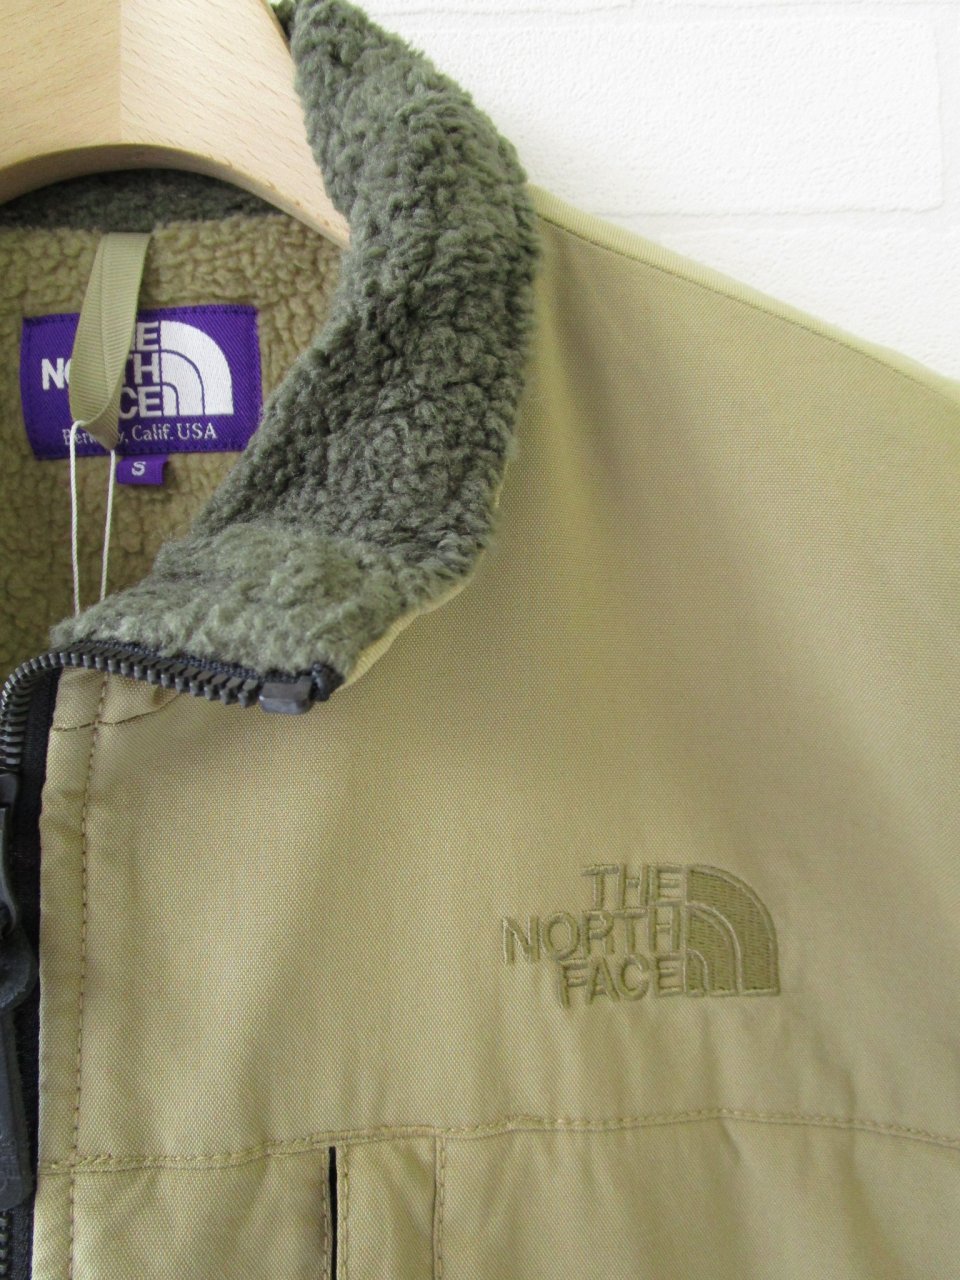 THE NORTH FACE - ポーラテック デナリ ベスト - Sheth Online Store 